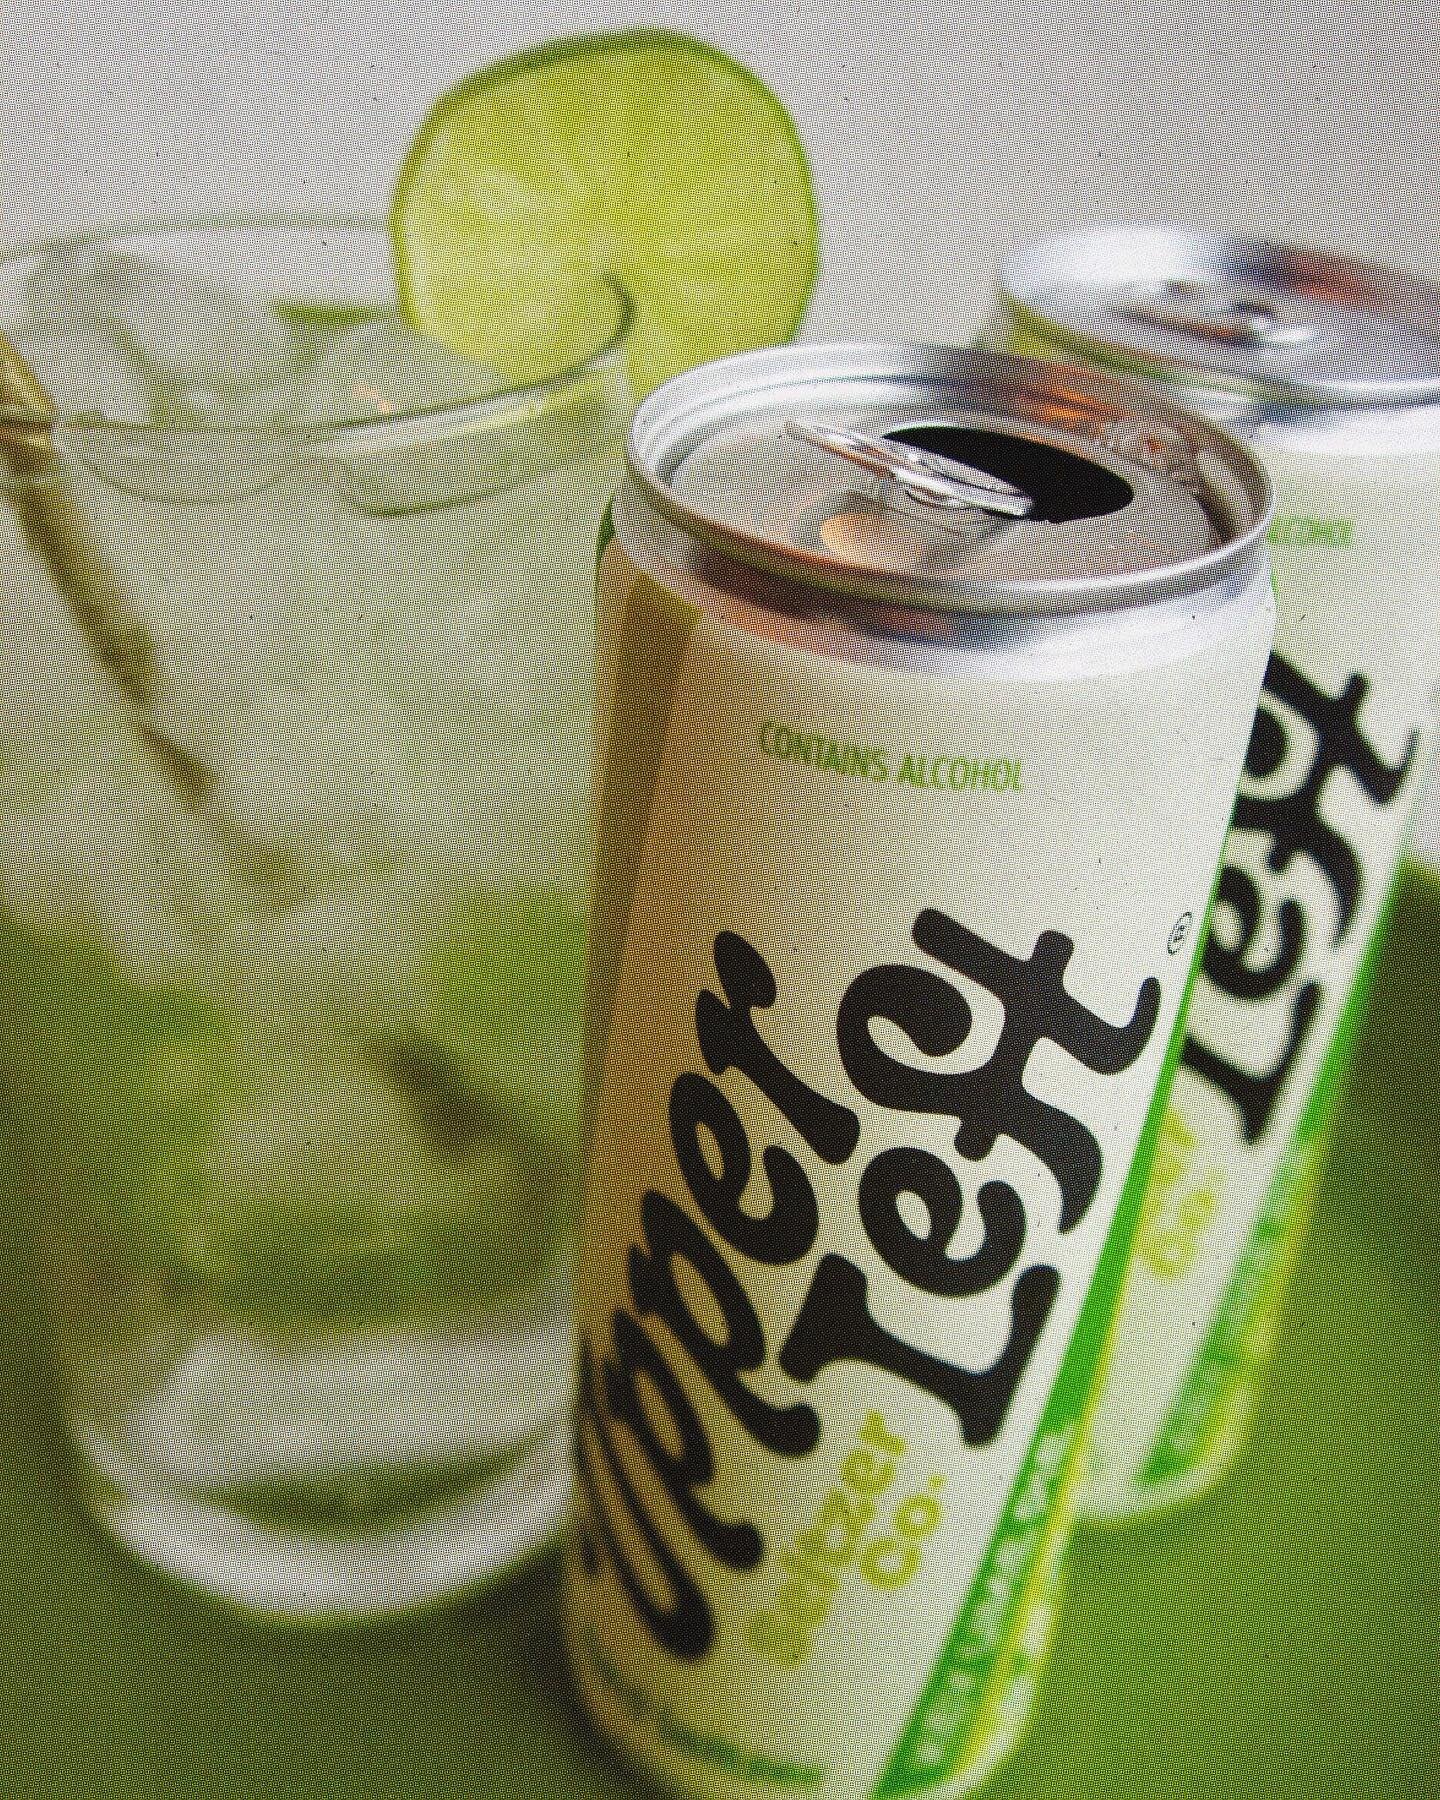 How do you Hard Seltzer: straight from the can or poured into a glass? ⬇️👋🏼